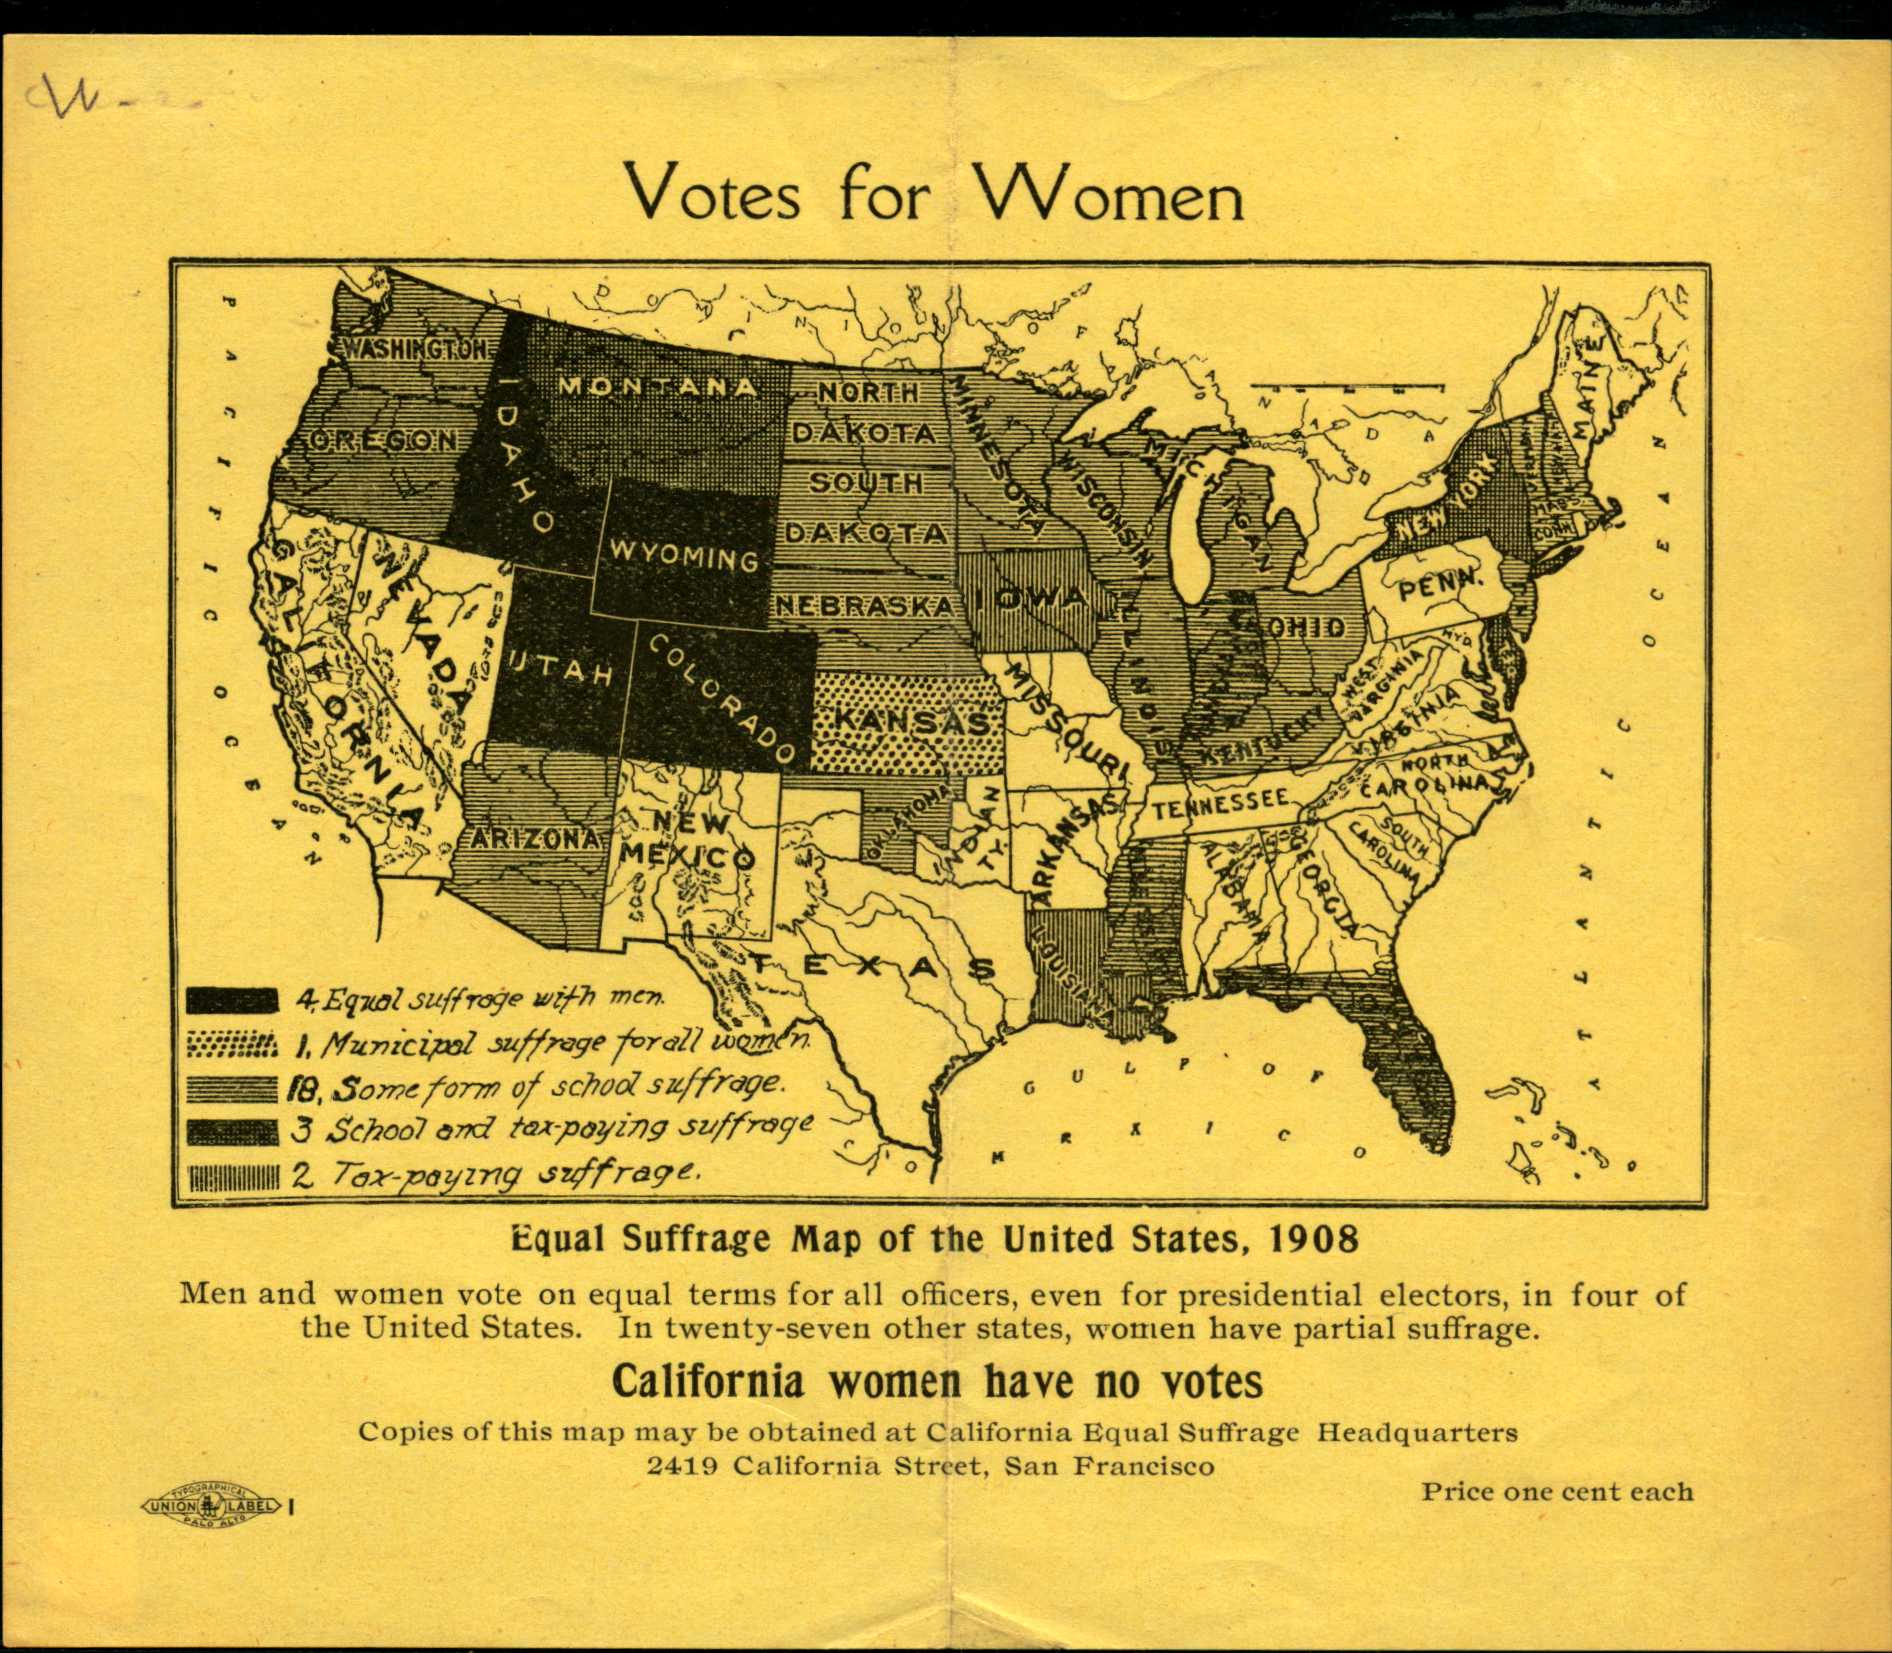 Shows a map of the United States with information on women's voting rights in every state